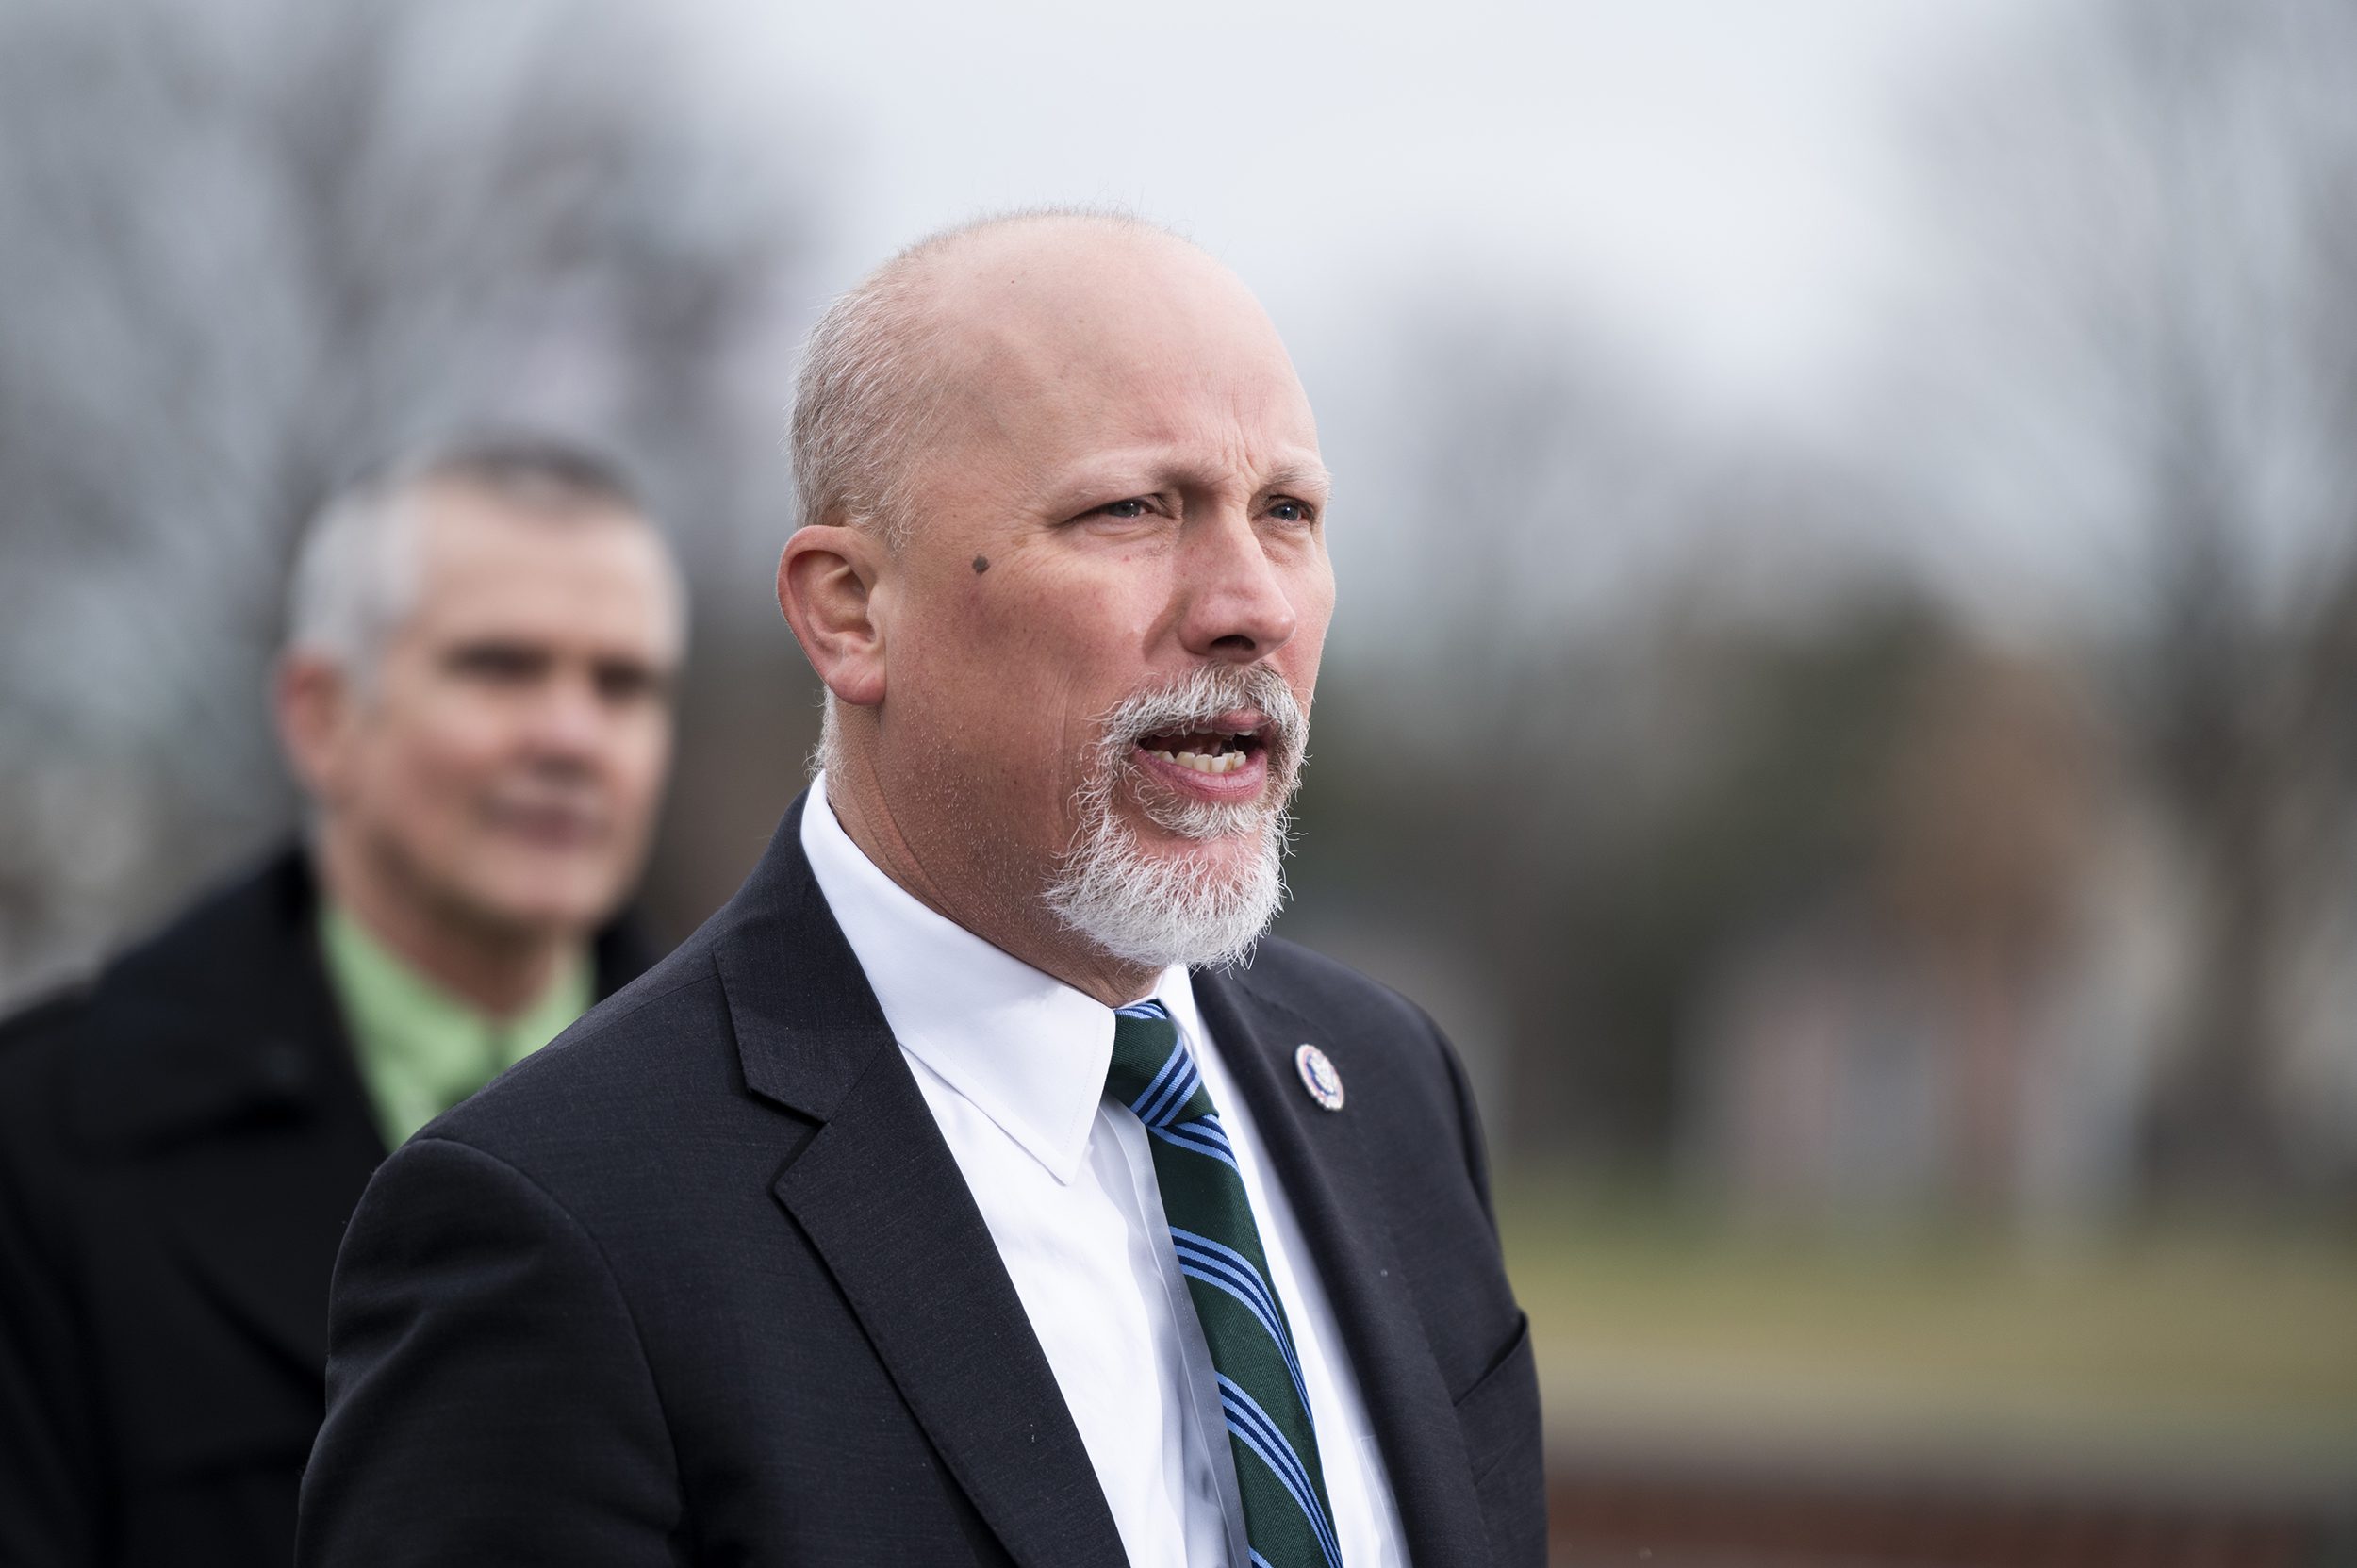 Rep. Chip Roy